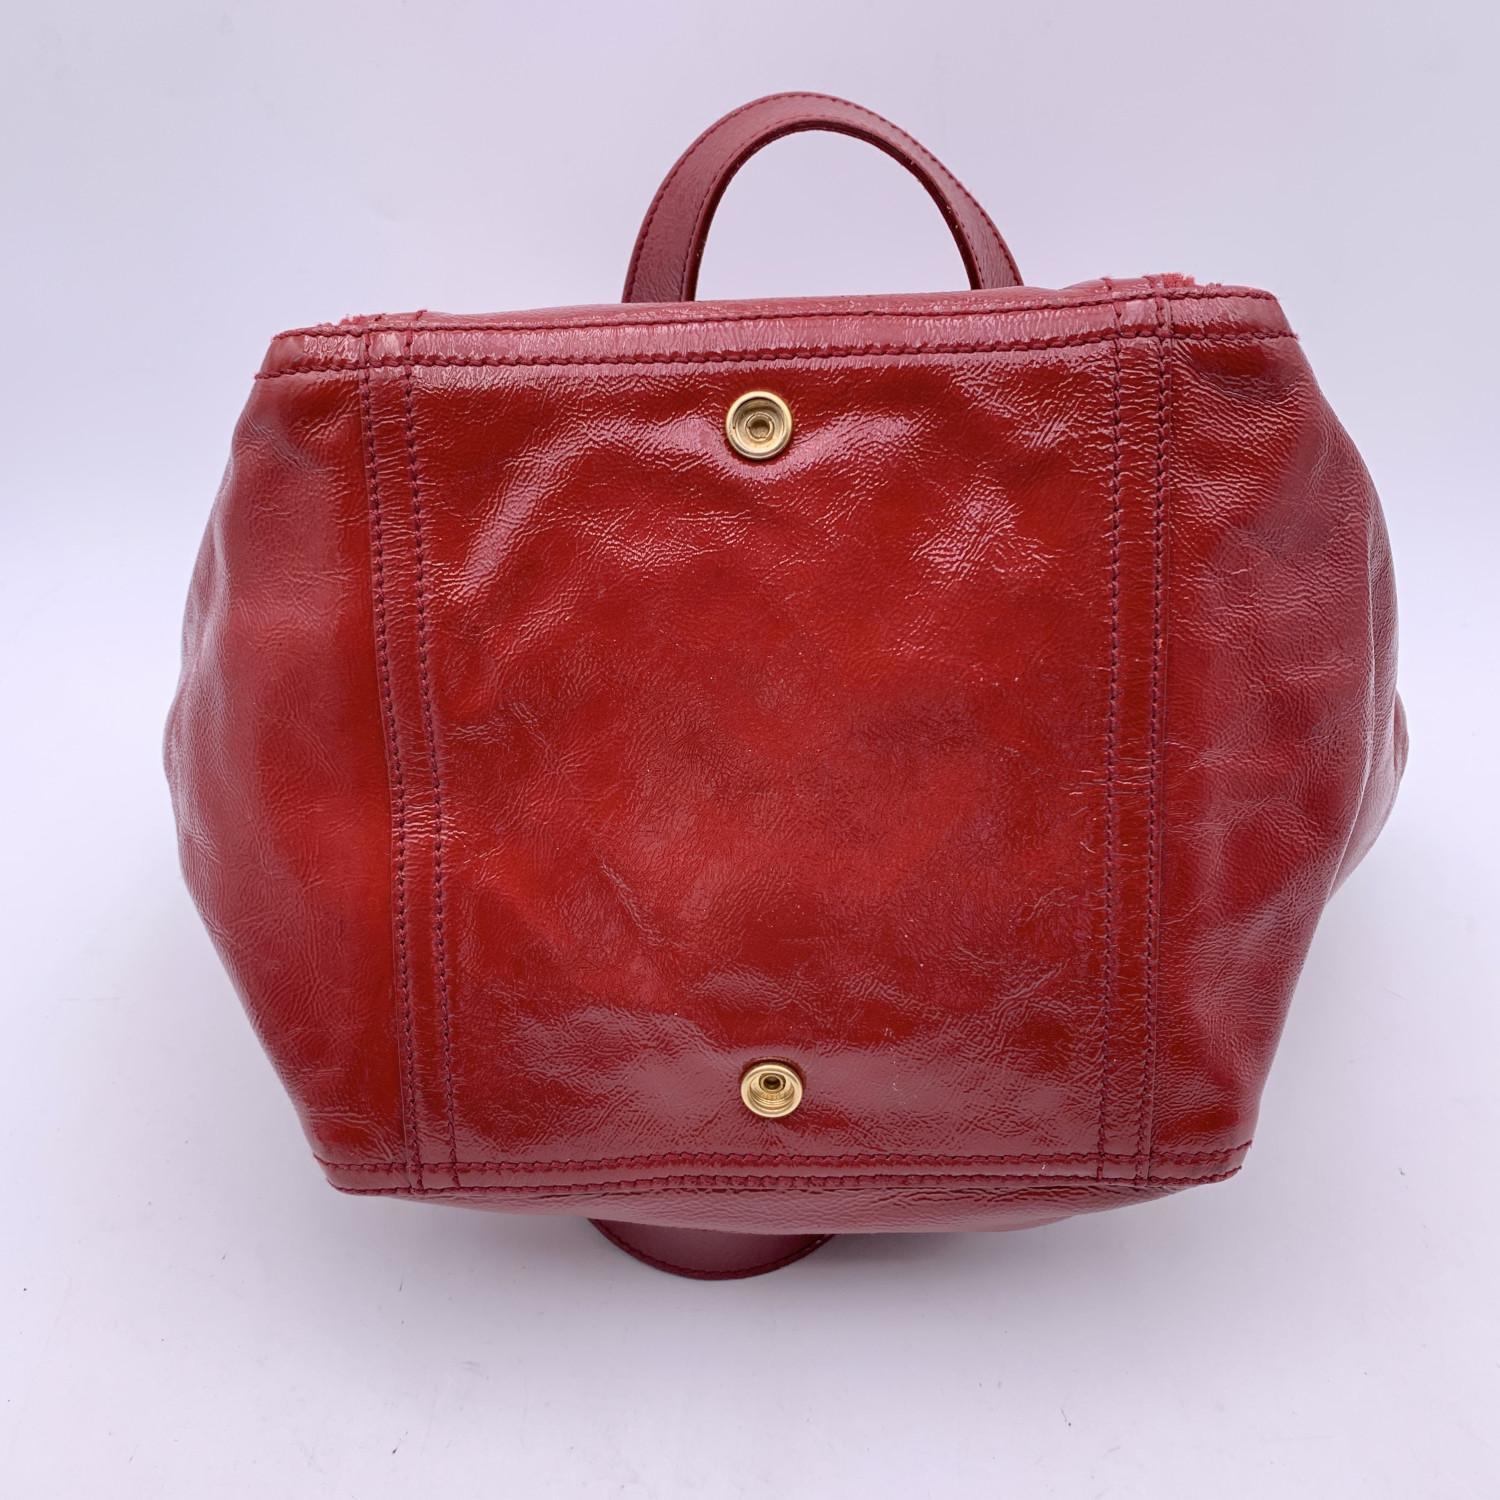 Yves Saint Laurent Red Patent Leather Downtown Tote Shoulder Bag 2